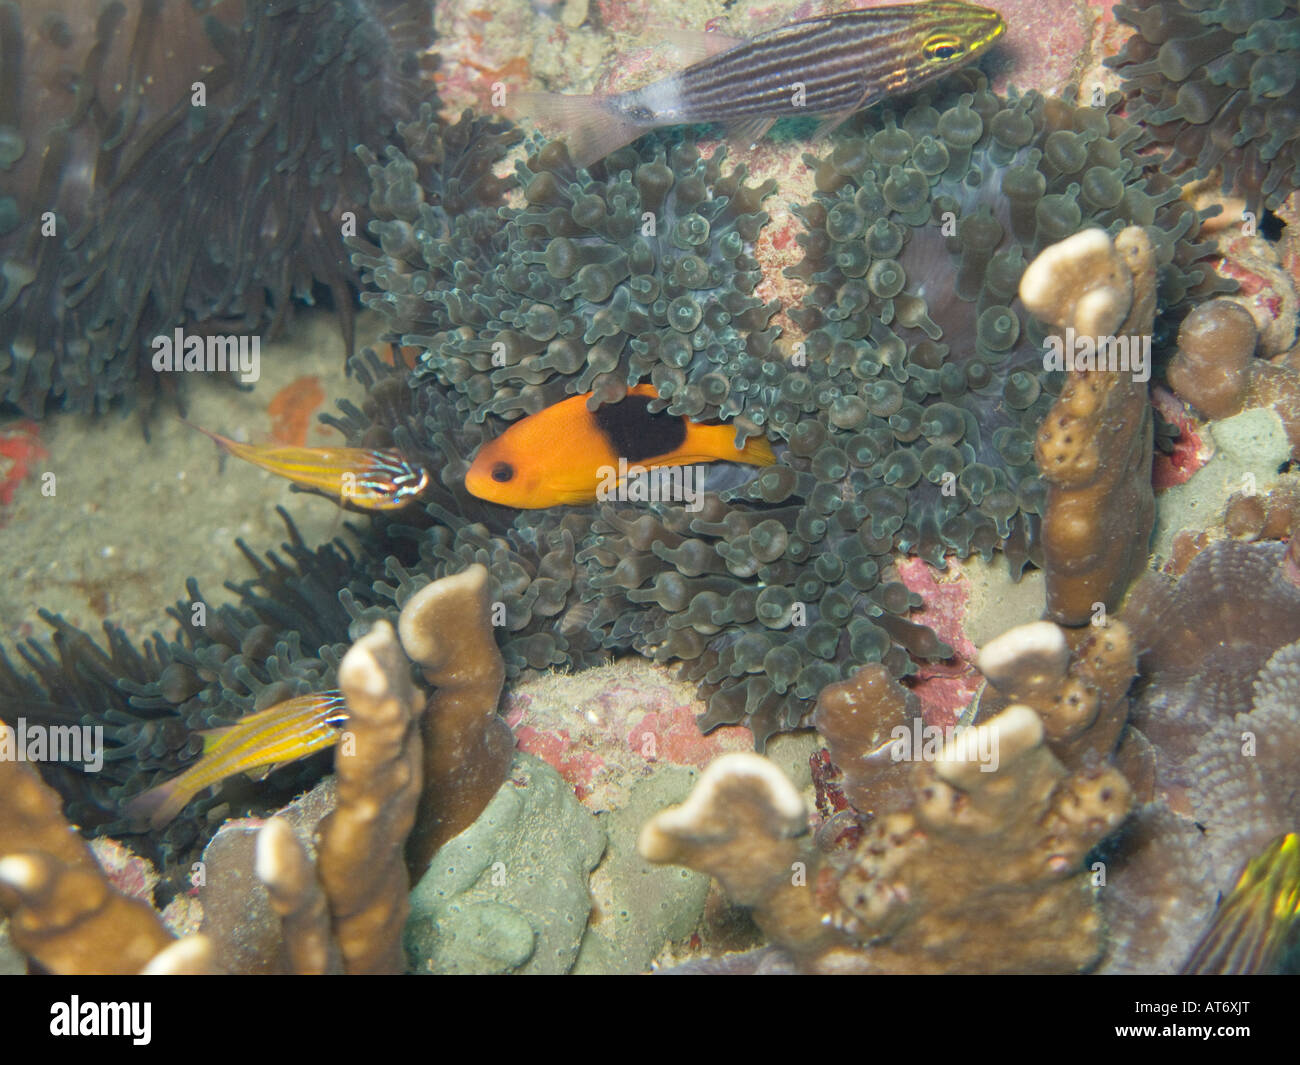 Red saddleback anemonefish, Amphiprion ephippium in bulb-tentacle anemone February 3 2008, Surin islands, Andaman sea, Thailand Stock Photo